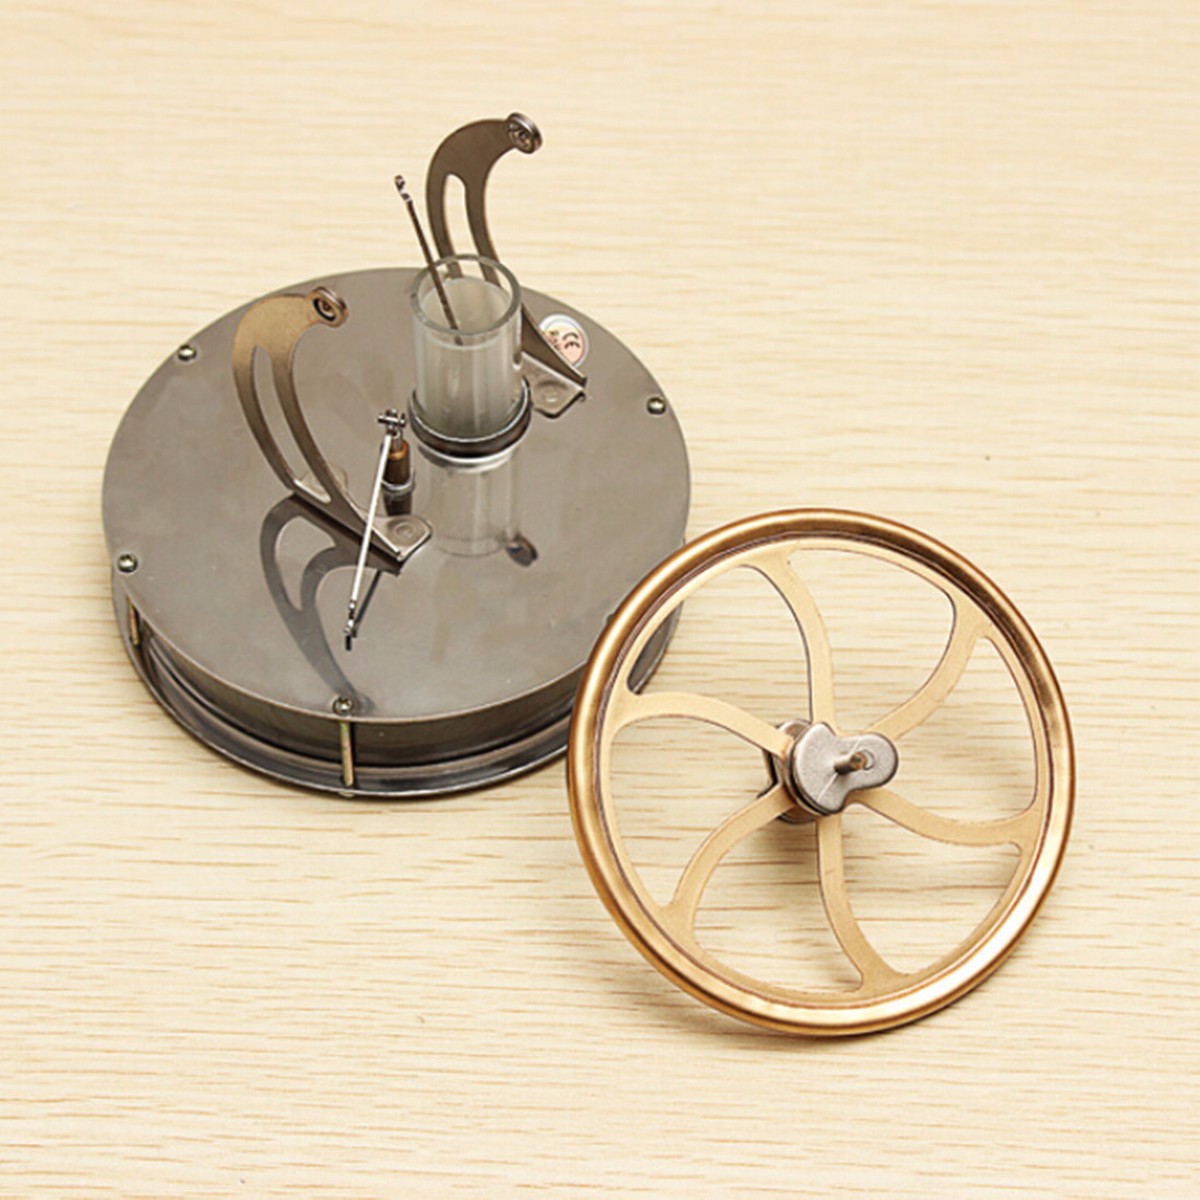 Low-Temperature-Stirling-Engine-Motor-Temperature-Difference-Cool-Model-Educational-Toy-1164414-2